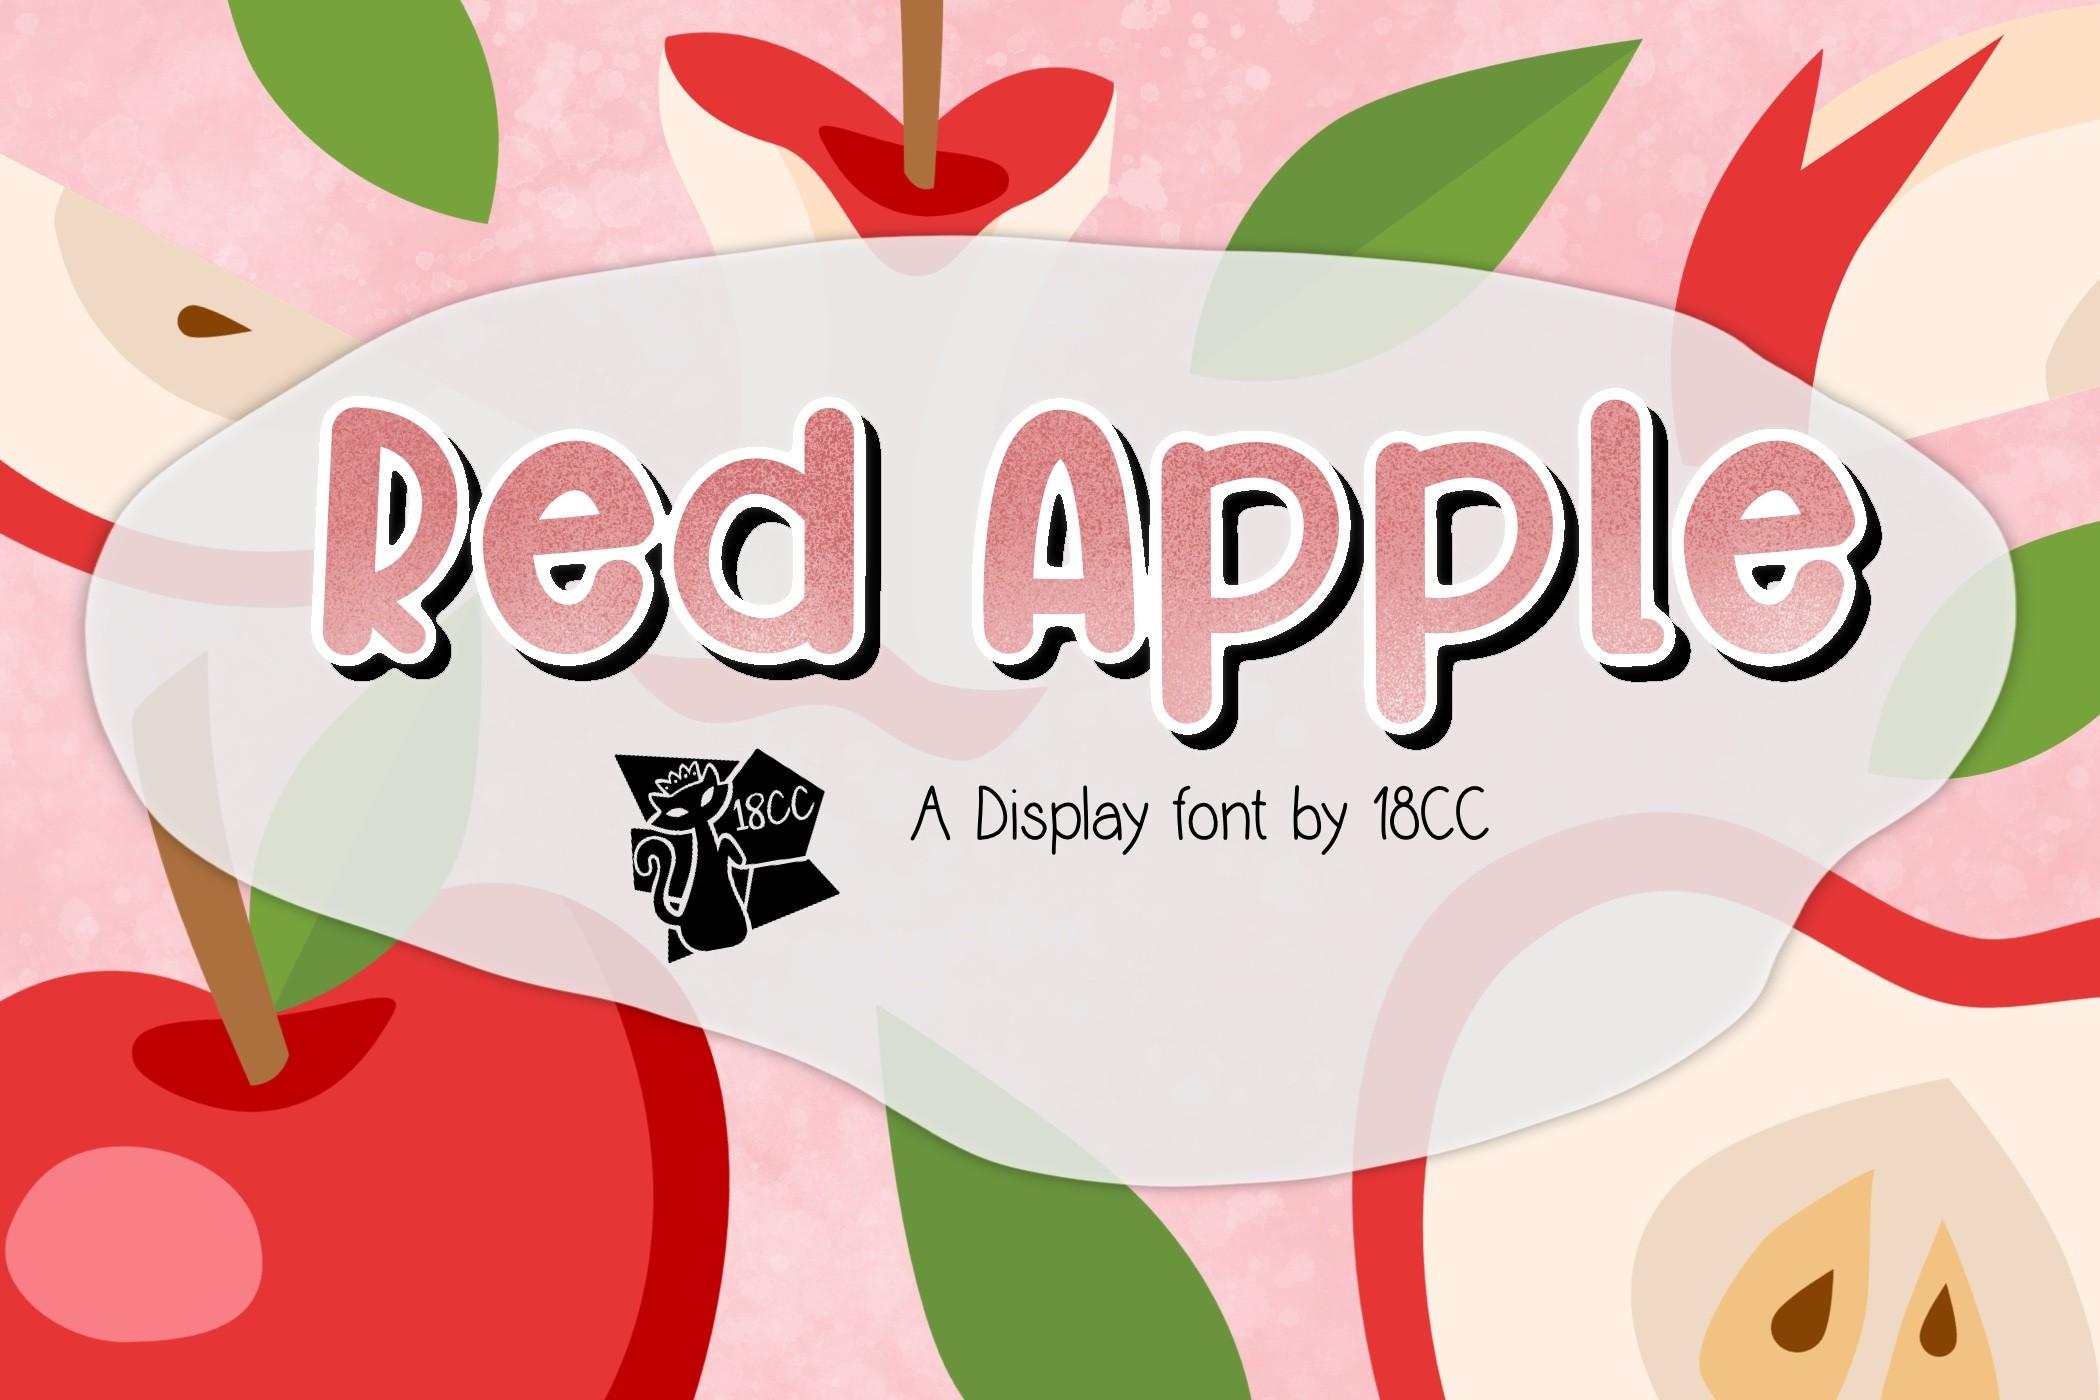 Red Apple Font